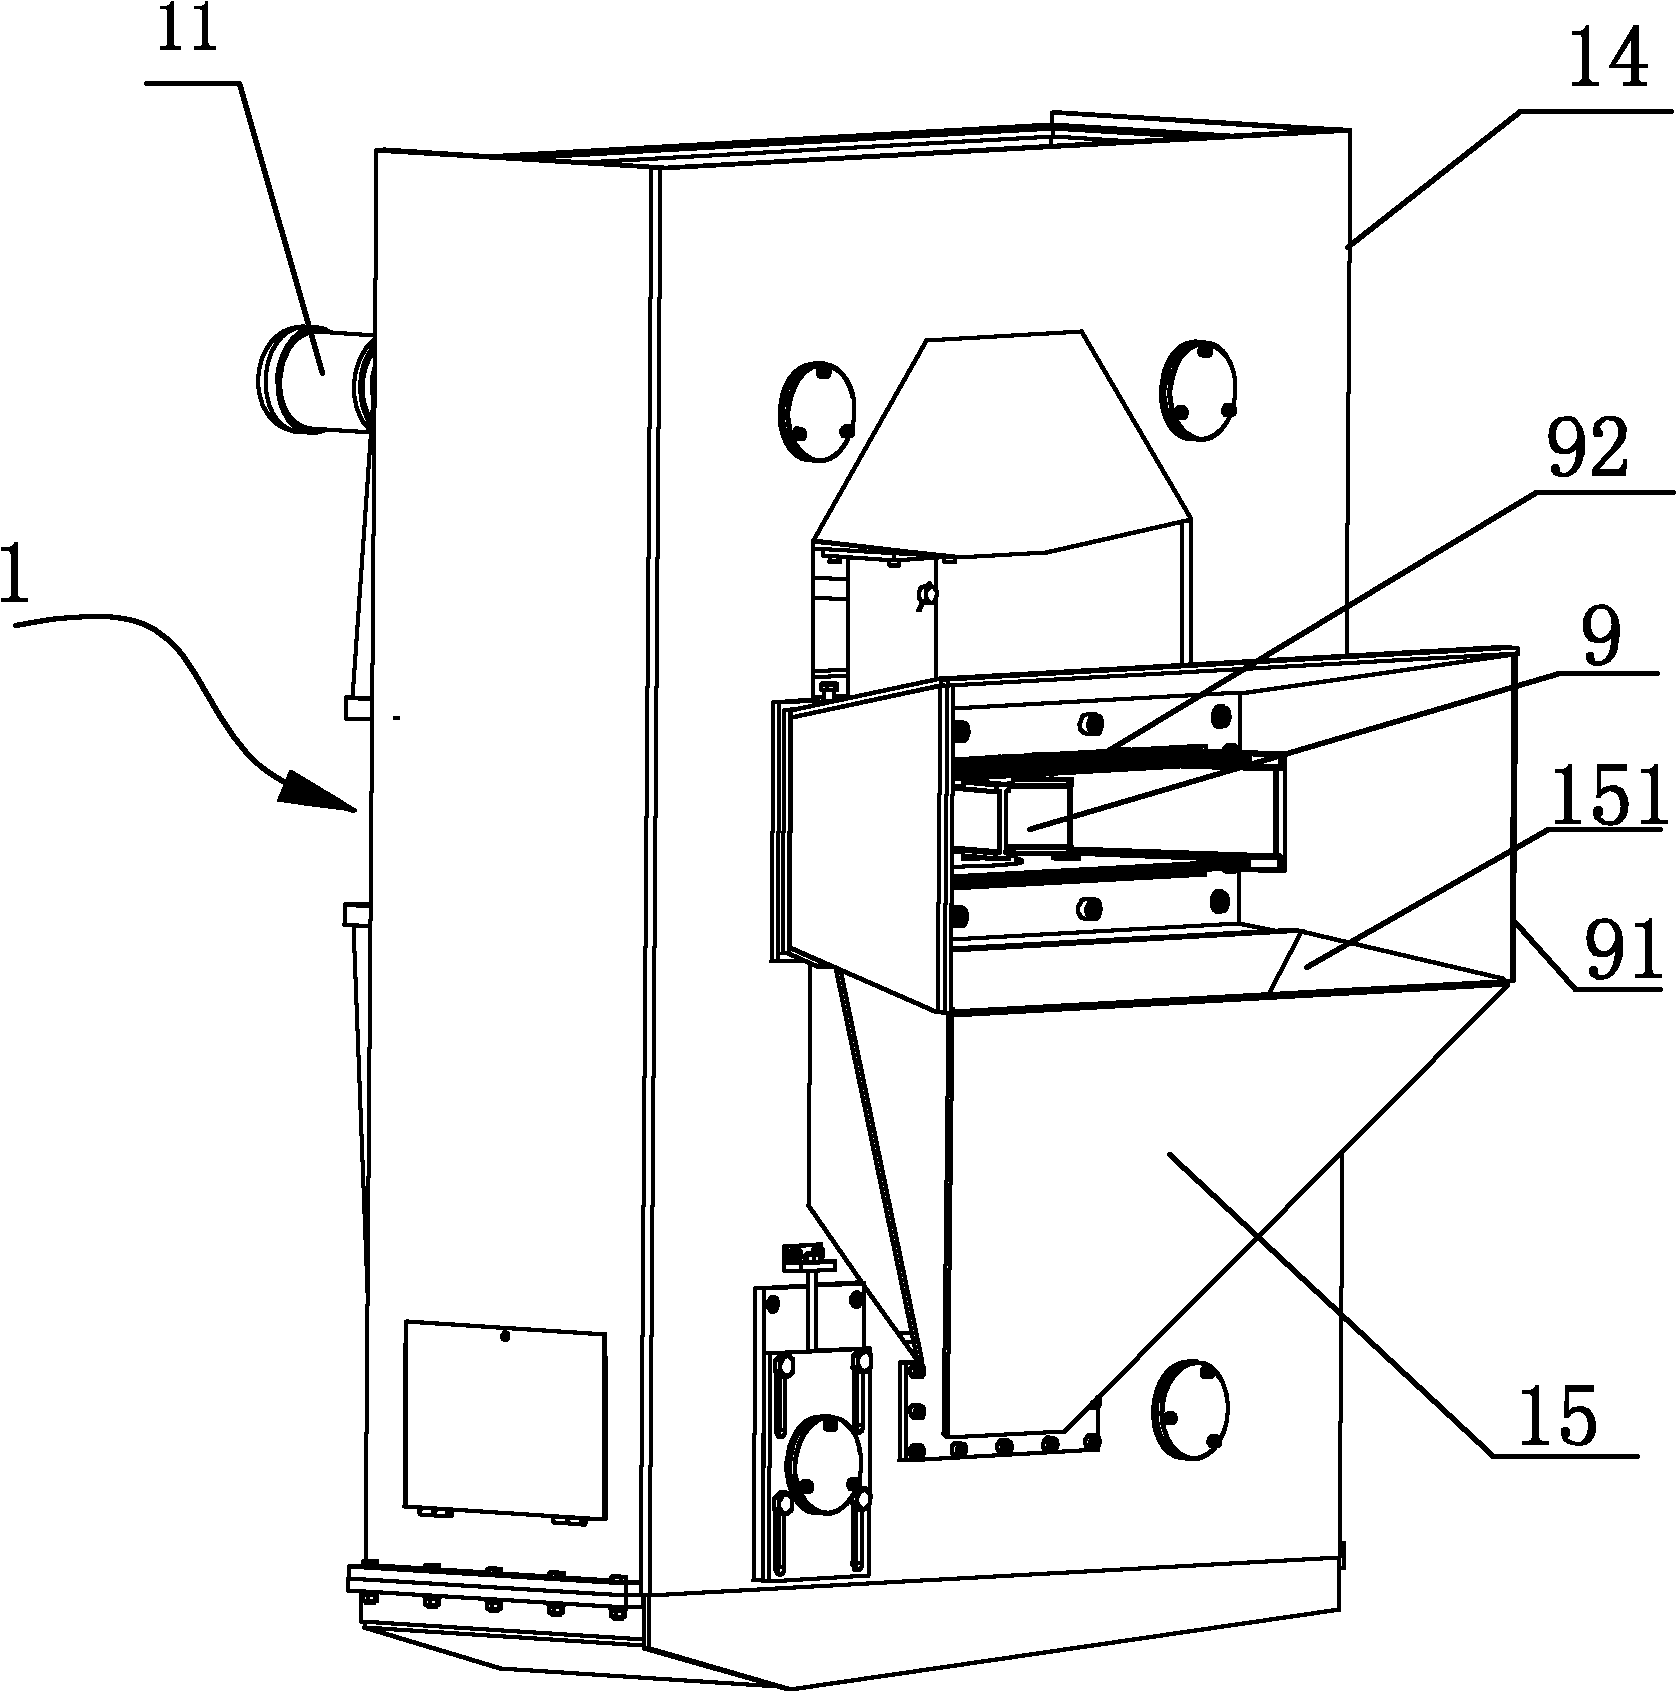 Small steel shot feeding circulator and numerical control metal surface treating machine using the same